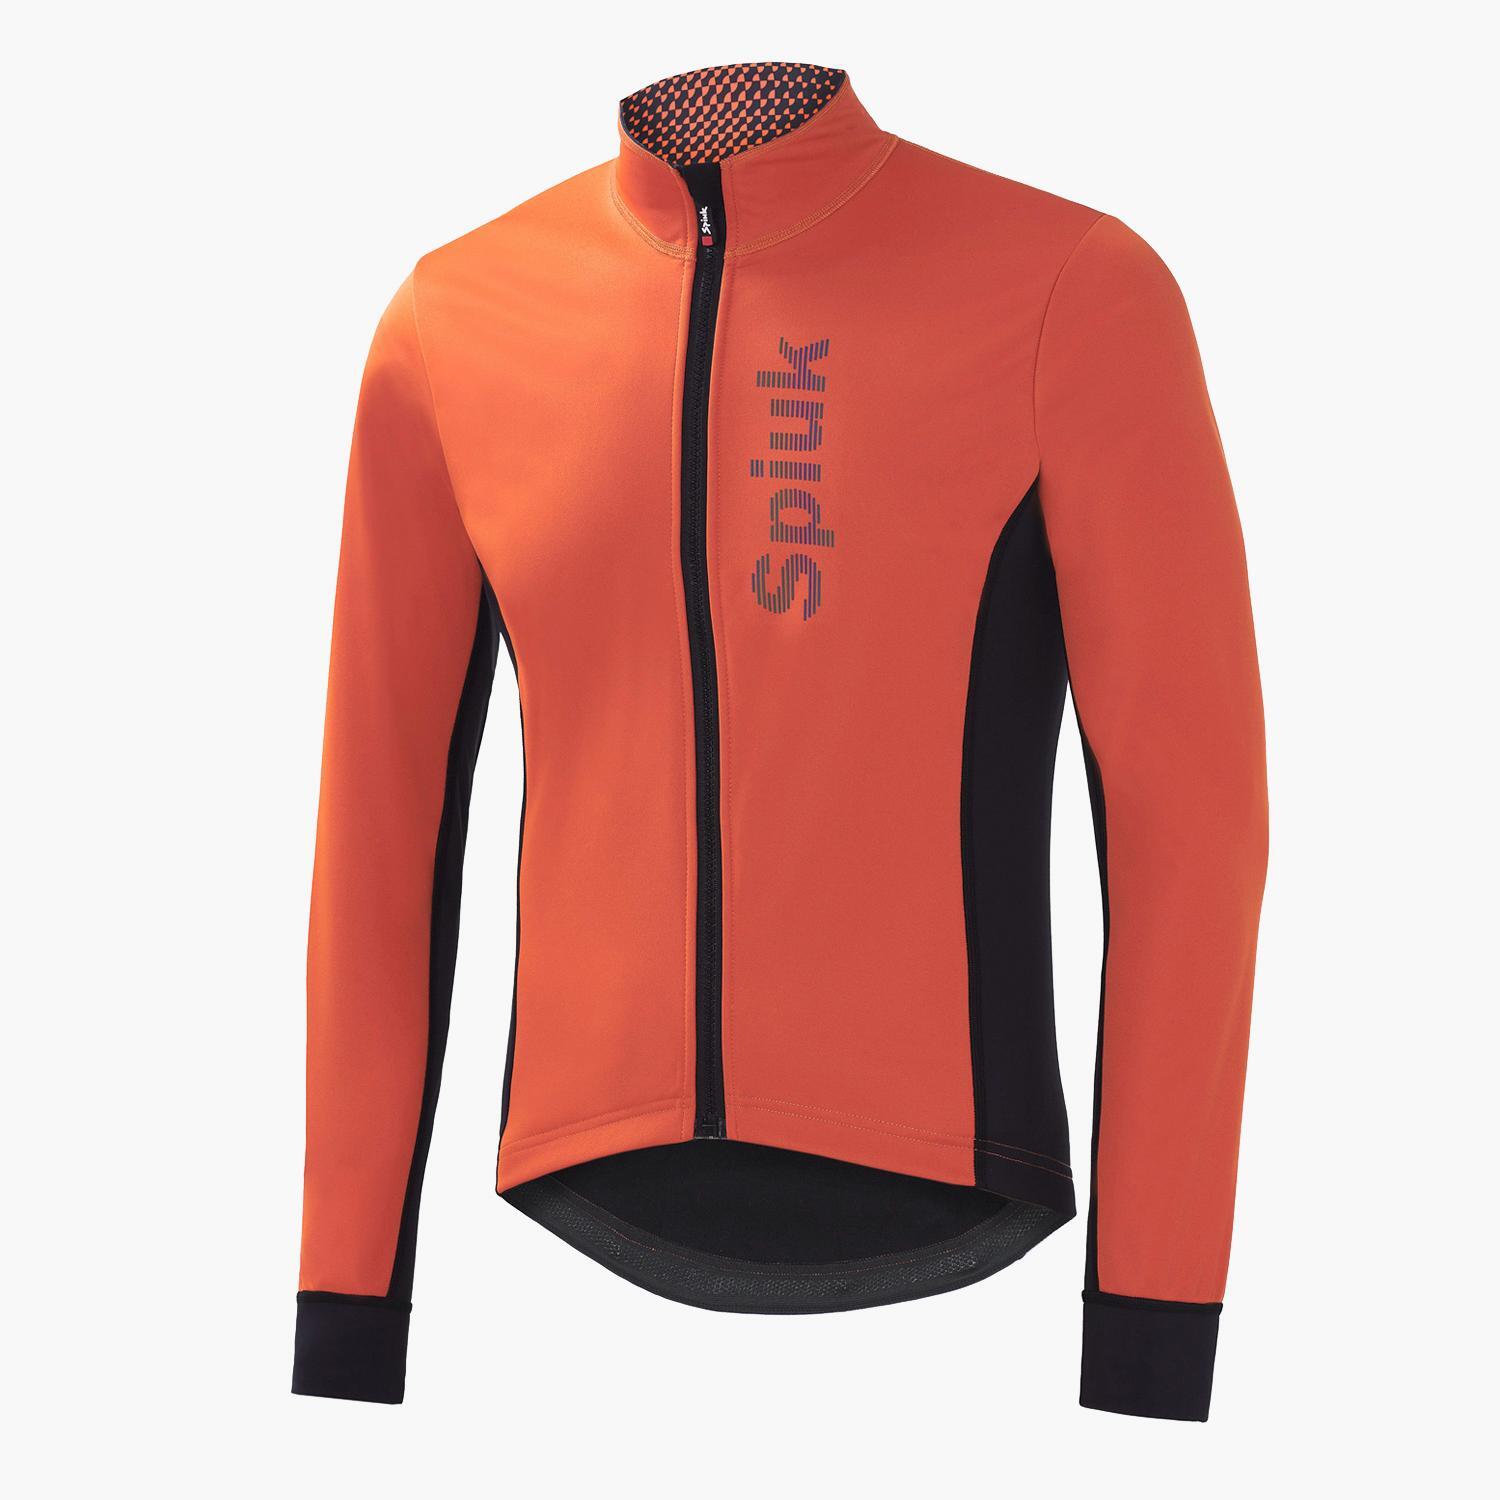 Spiuk Anatomic - Rouge - Veste Cyclisme Homme sports taille M